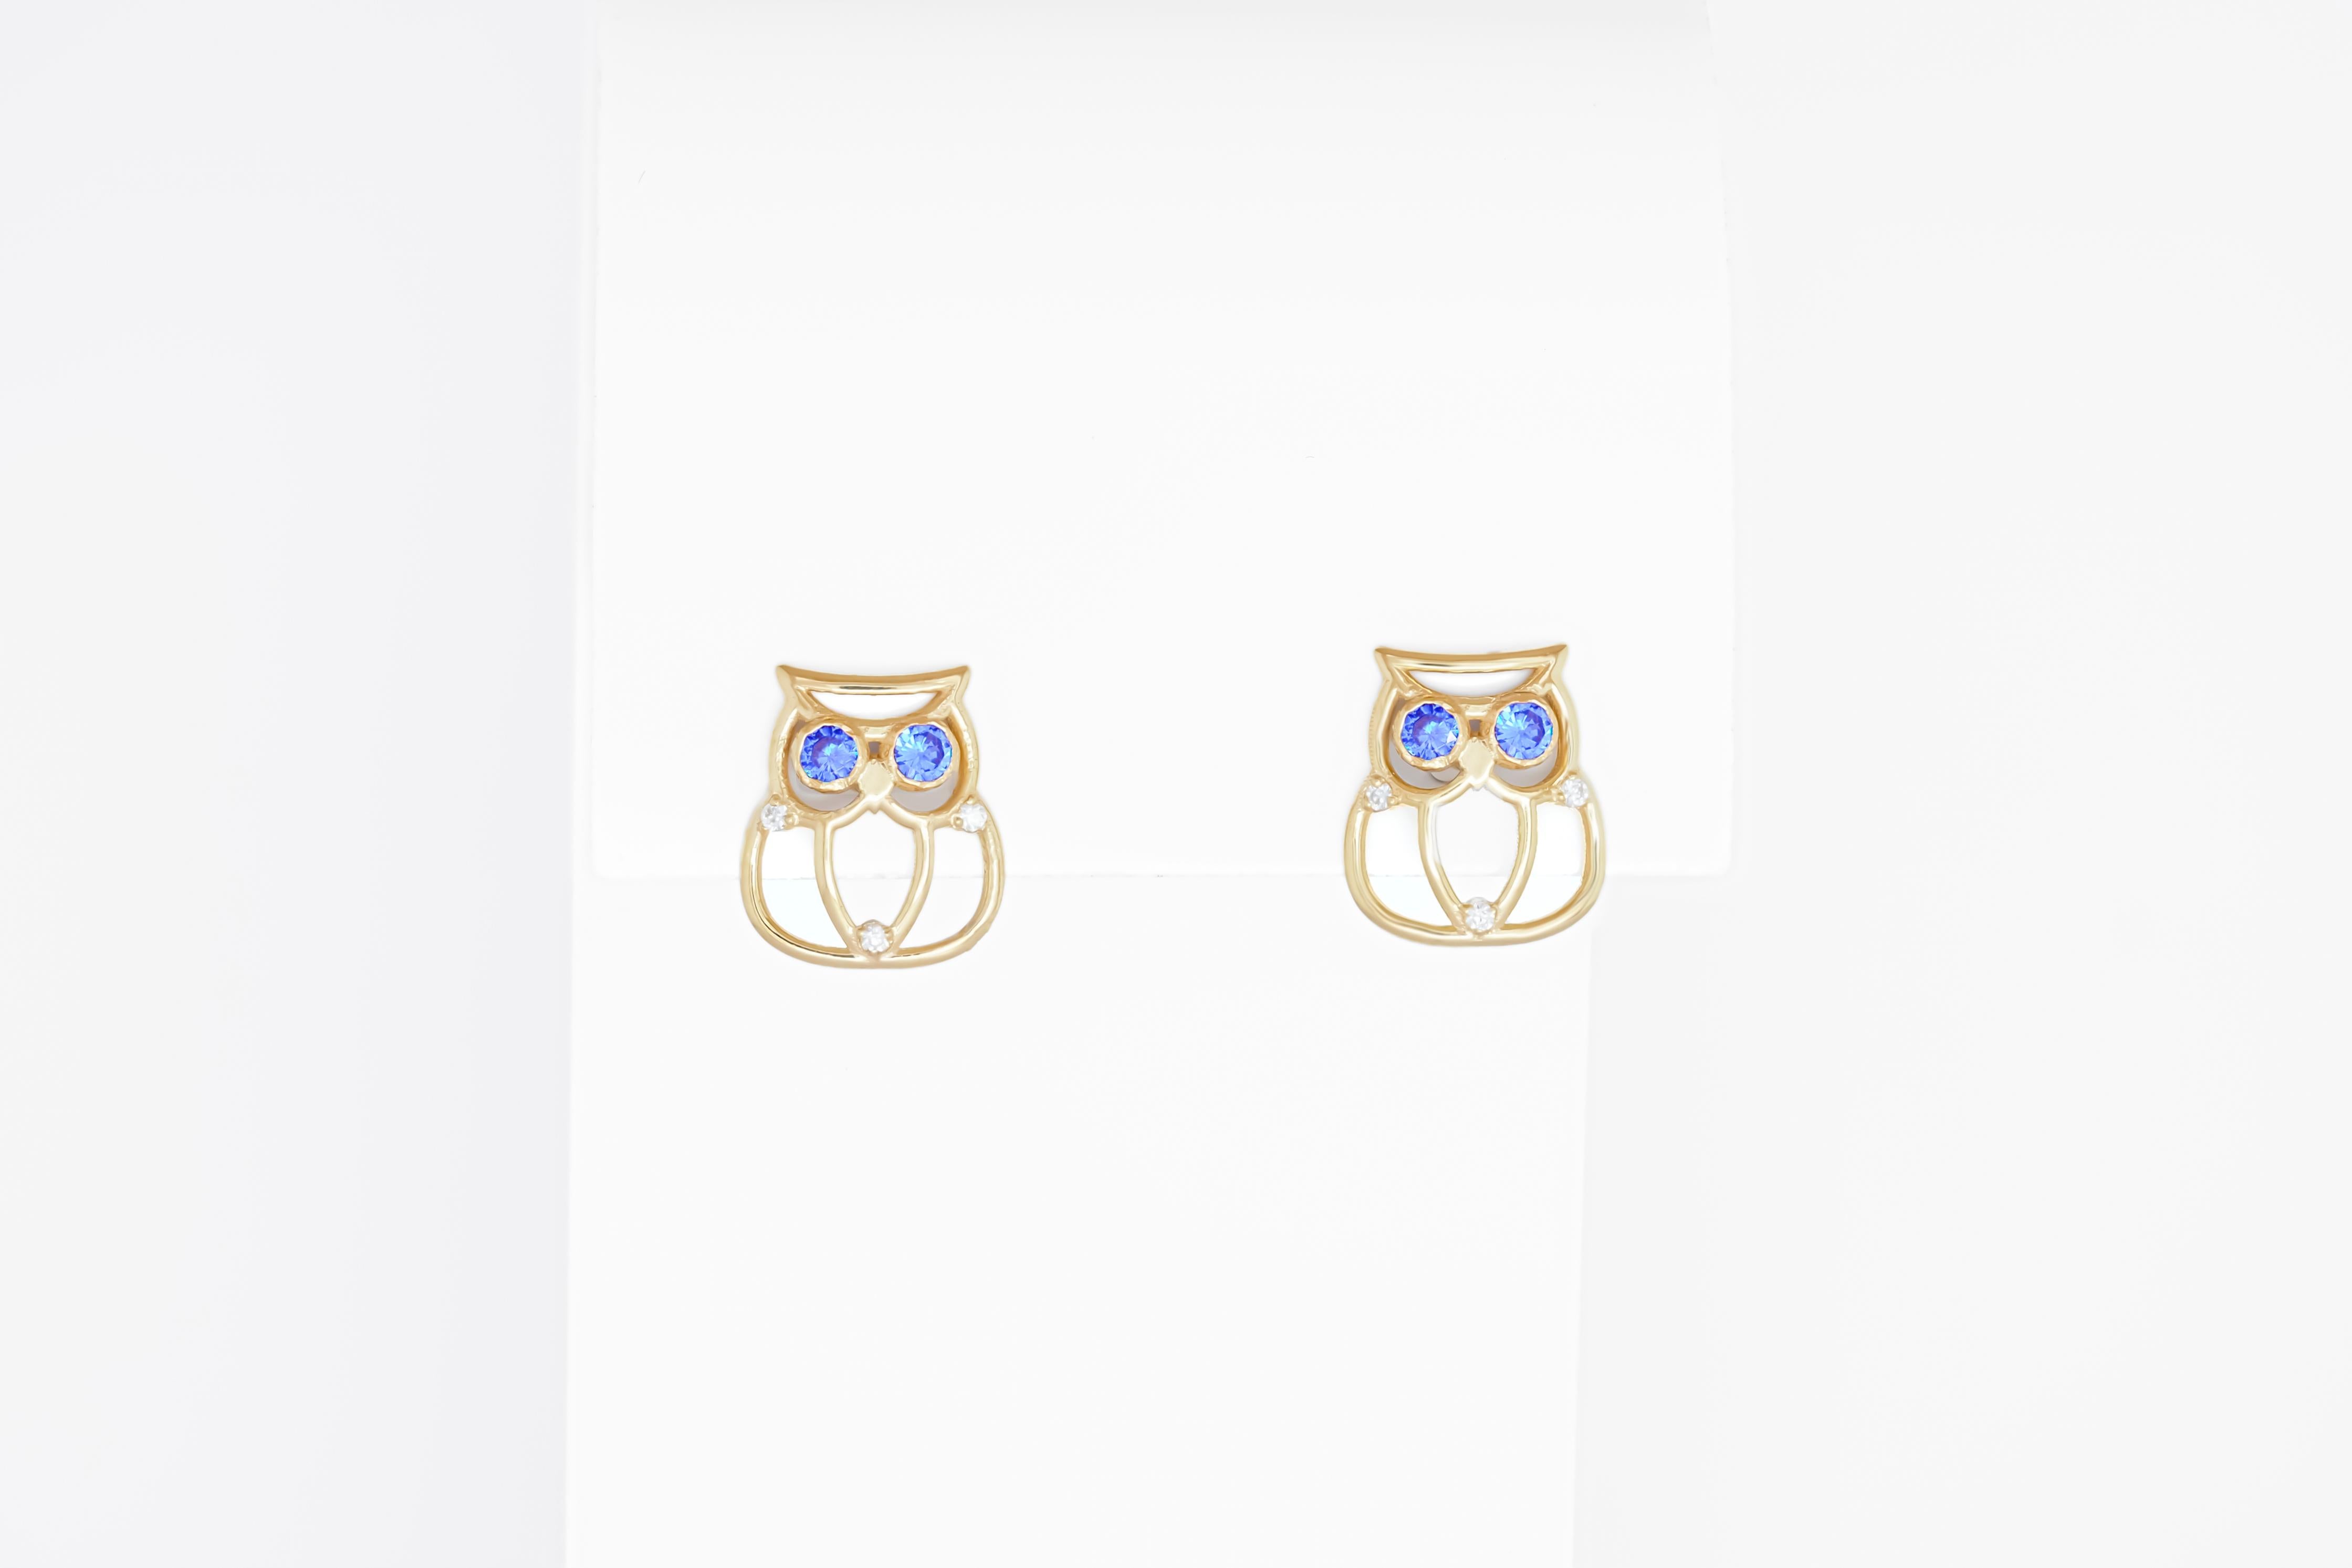 Owl earrings in 14k gold. 
Bird earrings with sapphires. Delicate gold earrings with blue gemstones. Blue sapphire earrings. 
 
Metal - 14k gold
Total Weight -2 gr
Earrings size: 12x10mm
Gemstones
2 sapphires, round cut, blue color, transparent,